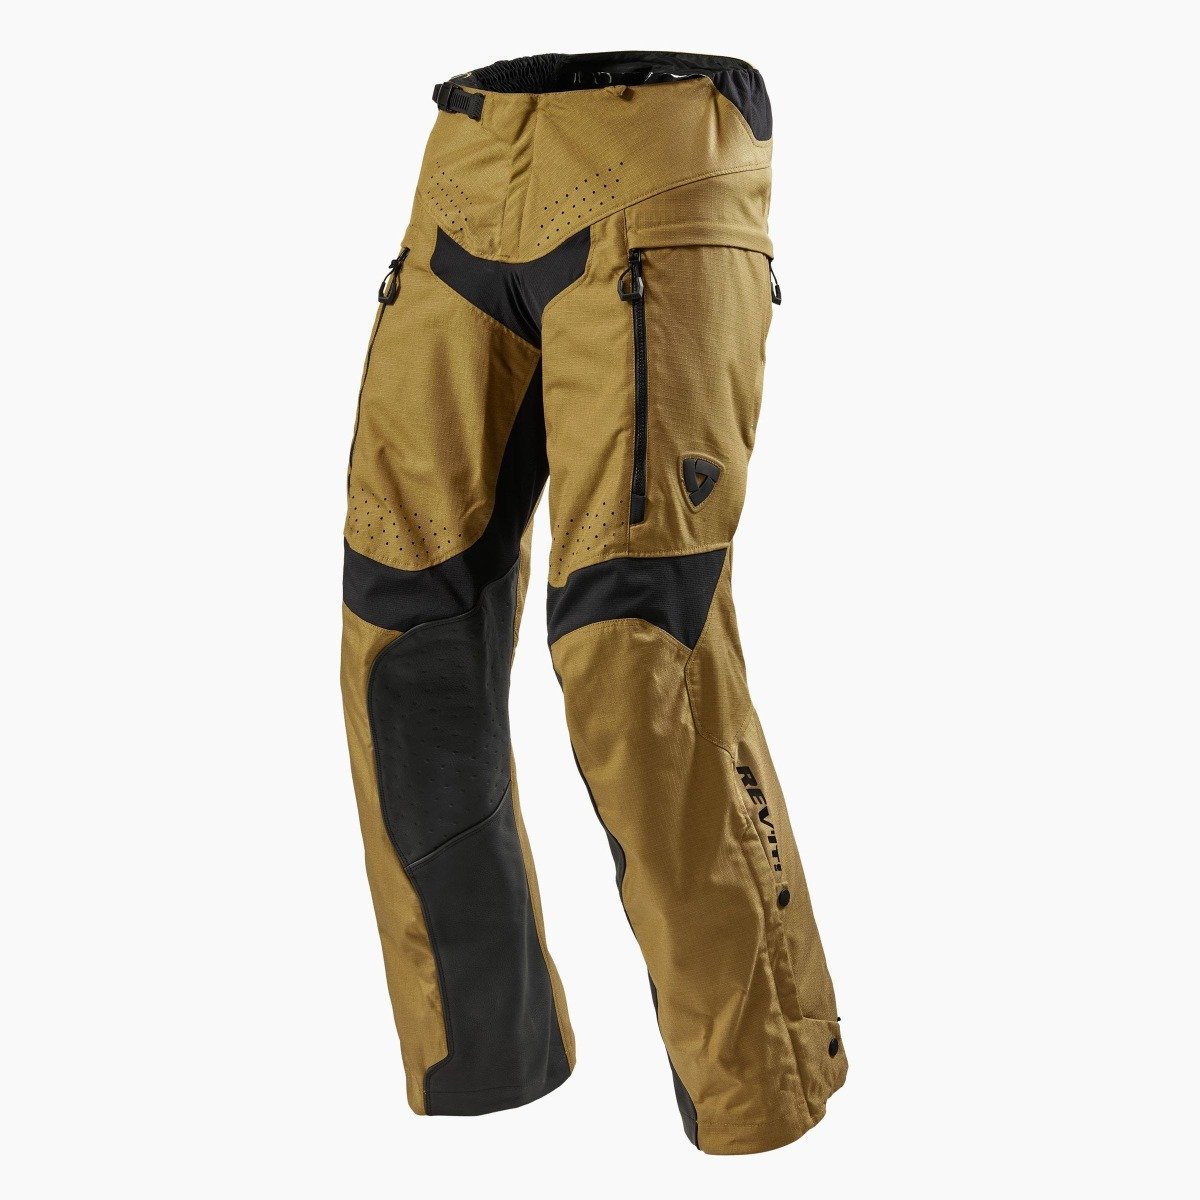 Image of REV'IT! Continent Ocher Yellow Motorcycle Pants Size XL EN